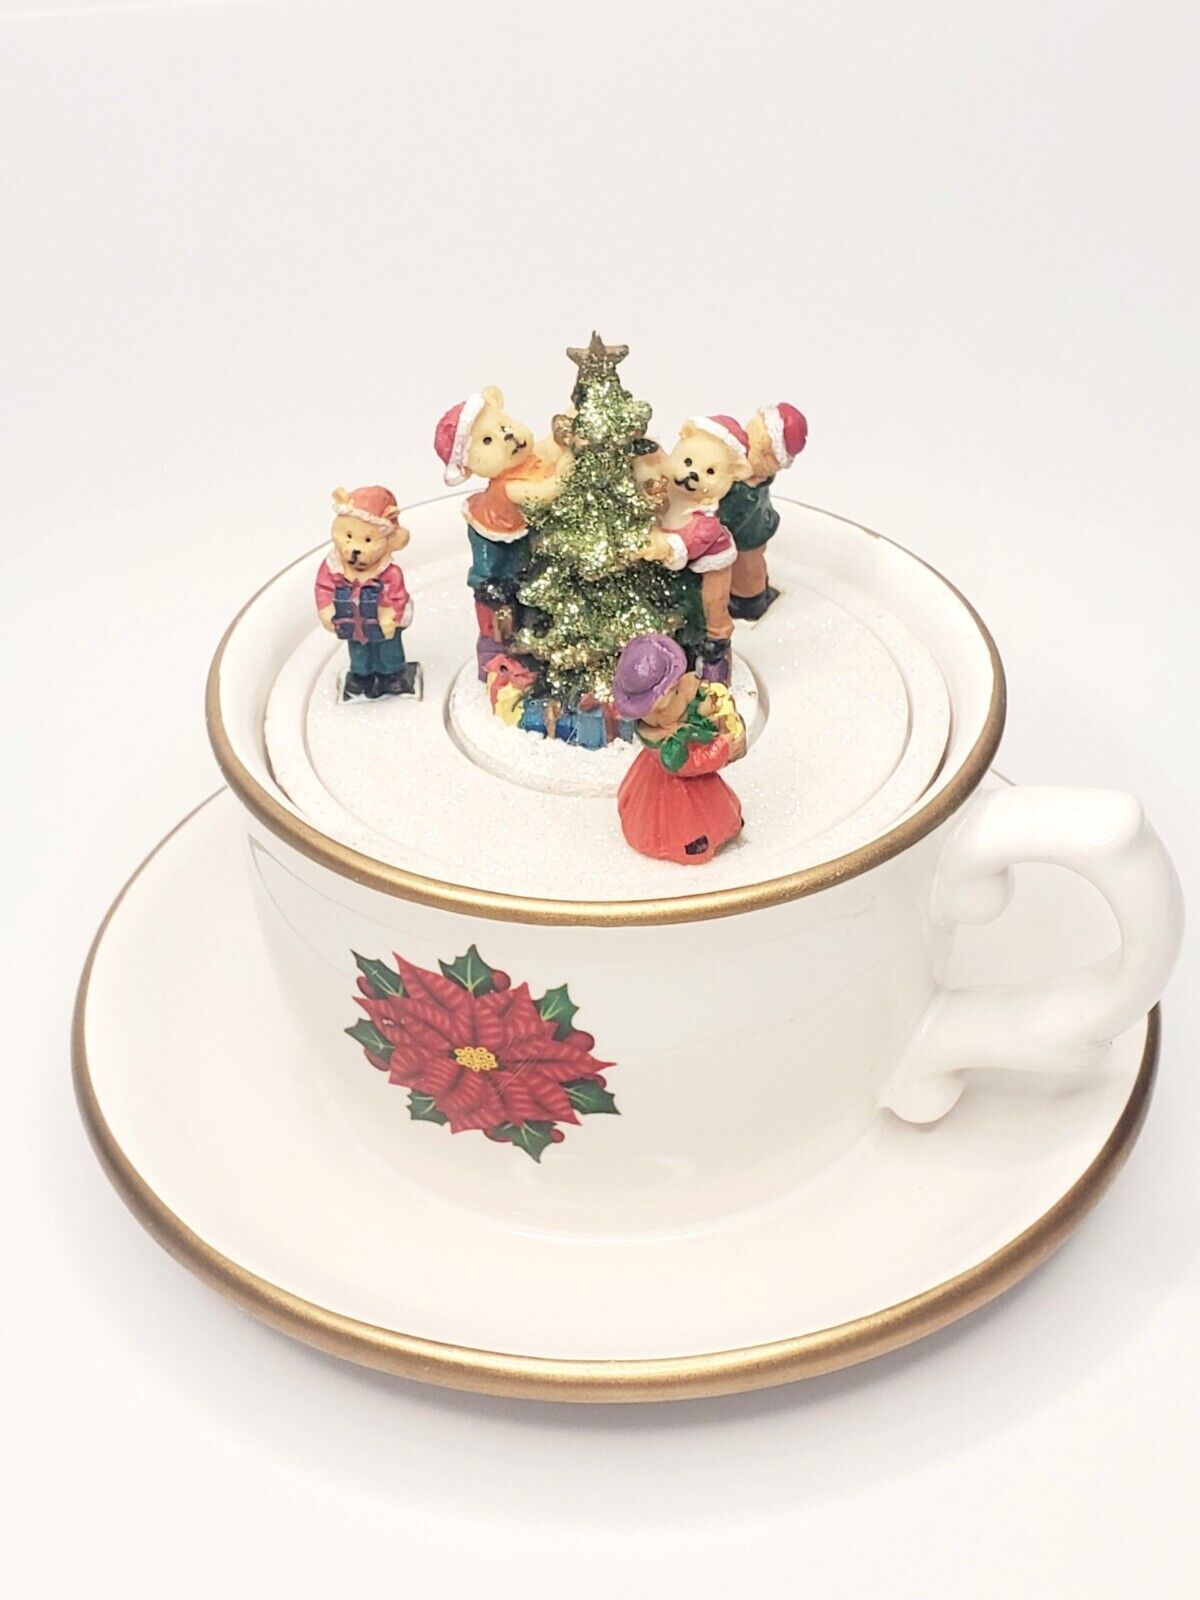 2012 Avon Musical Twirling Family In Teacup/Christmas Tree-Wind Up Music Box